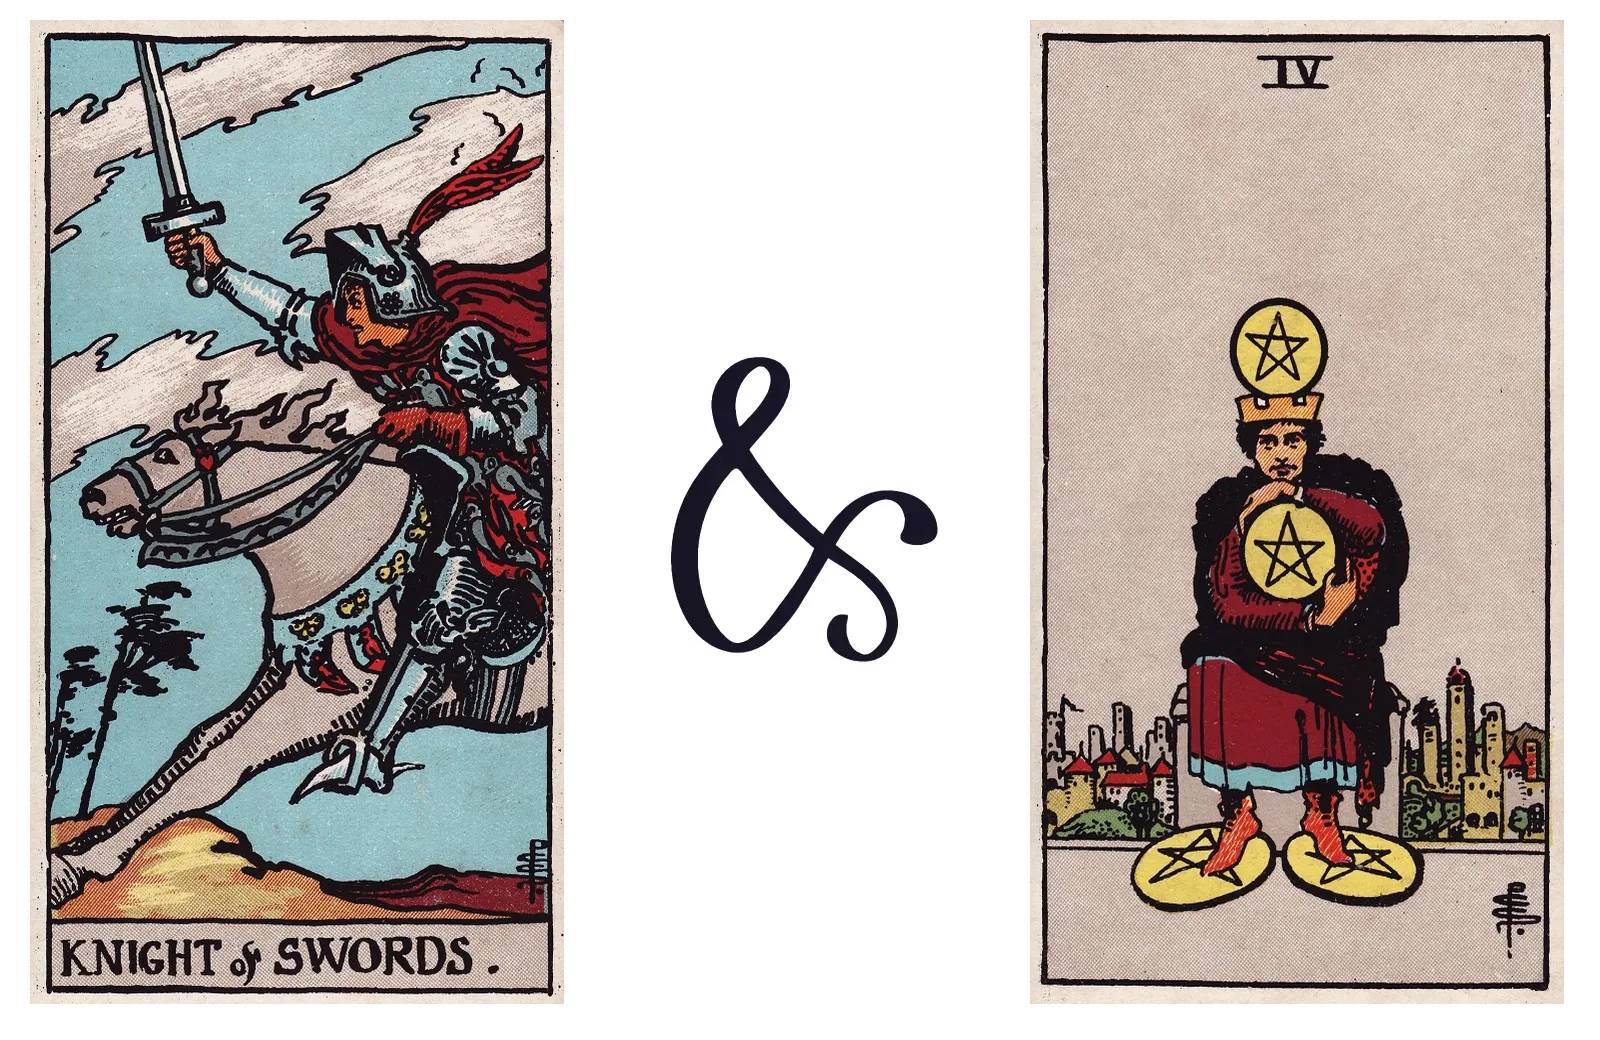 Knight of Swords and Four of Pentacles